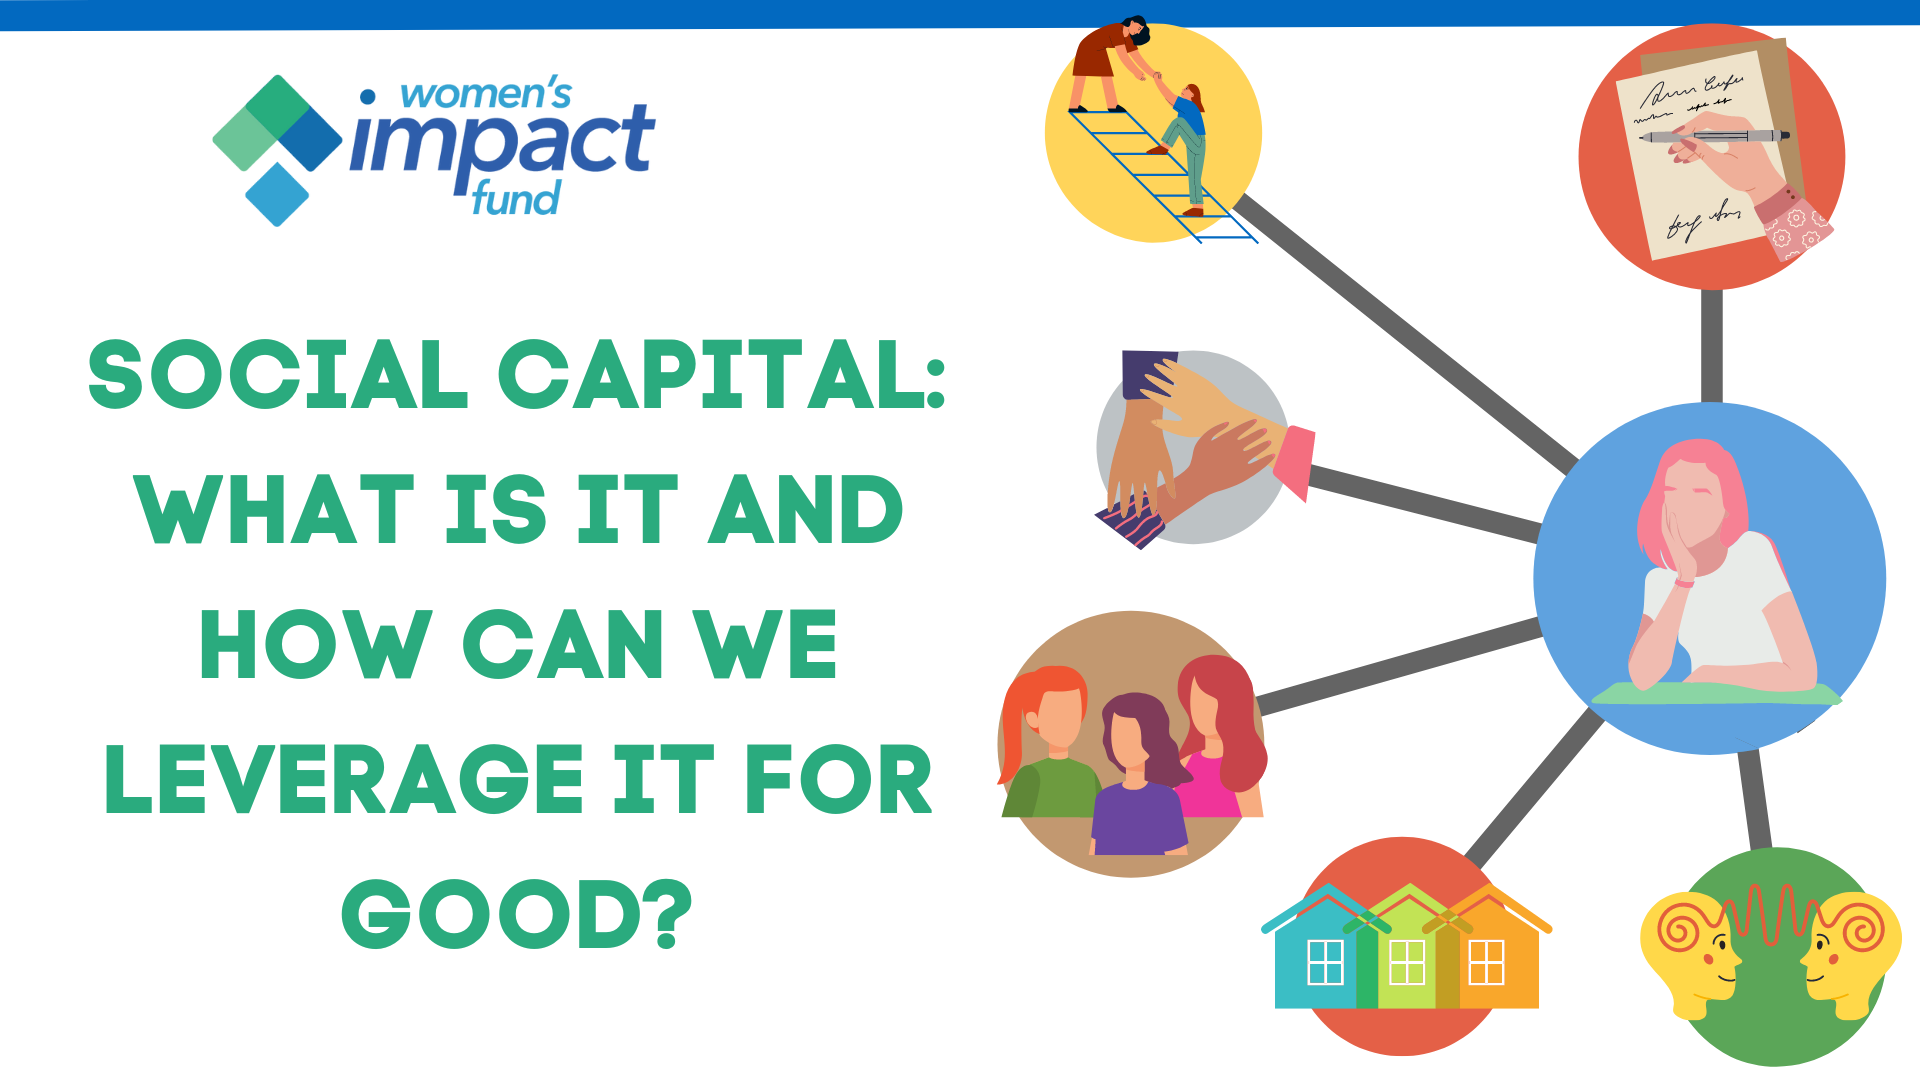 Social Capital: What is it and how can we leverage it for good?